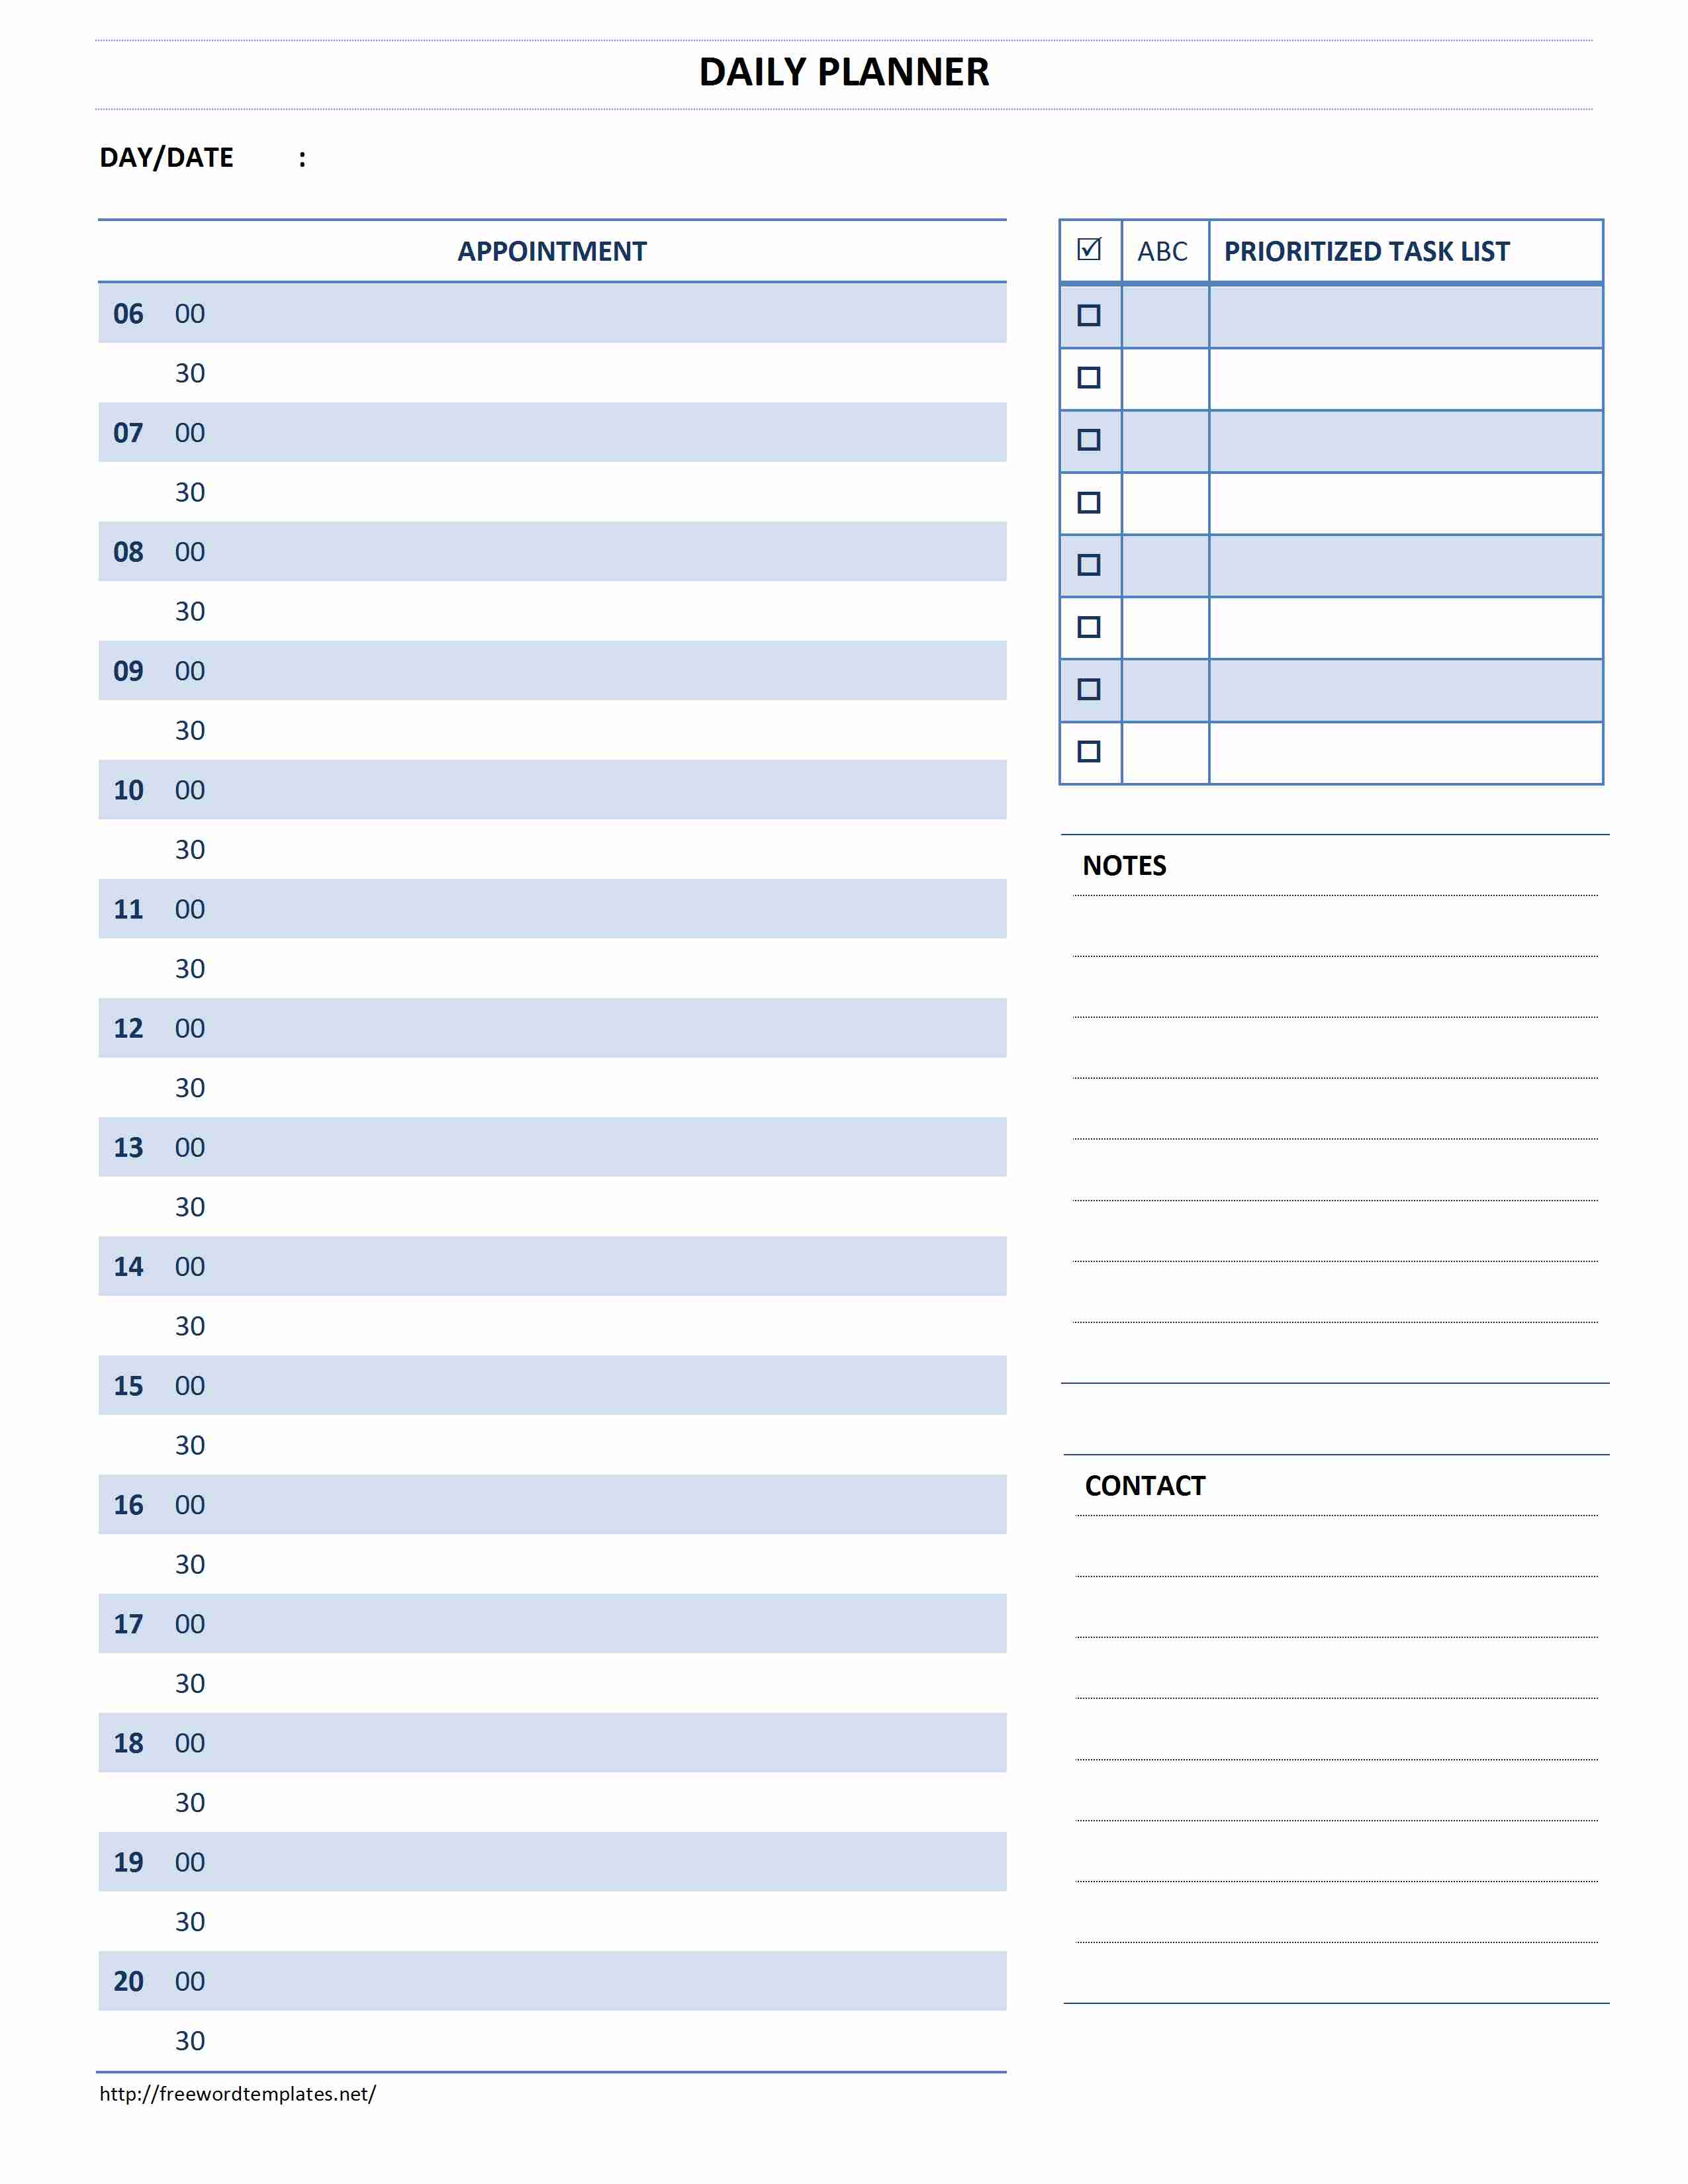 Daily Planner Template Free Download